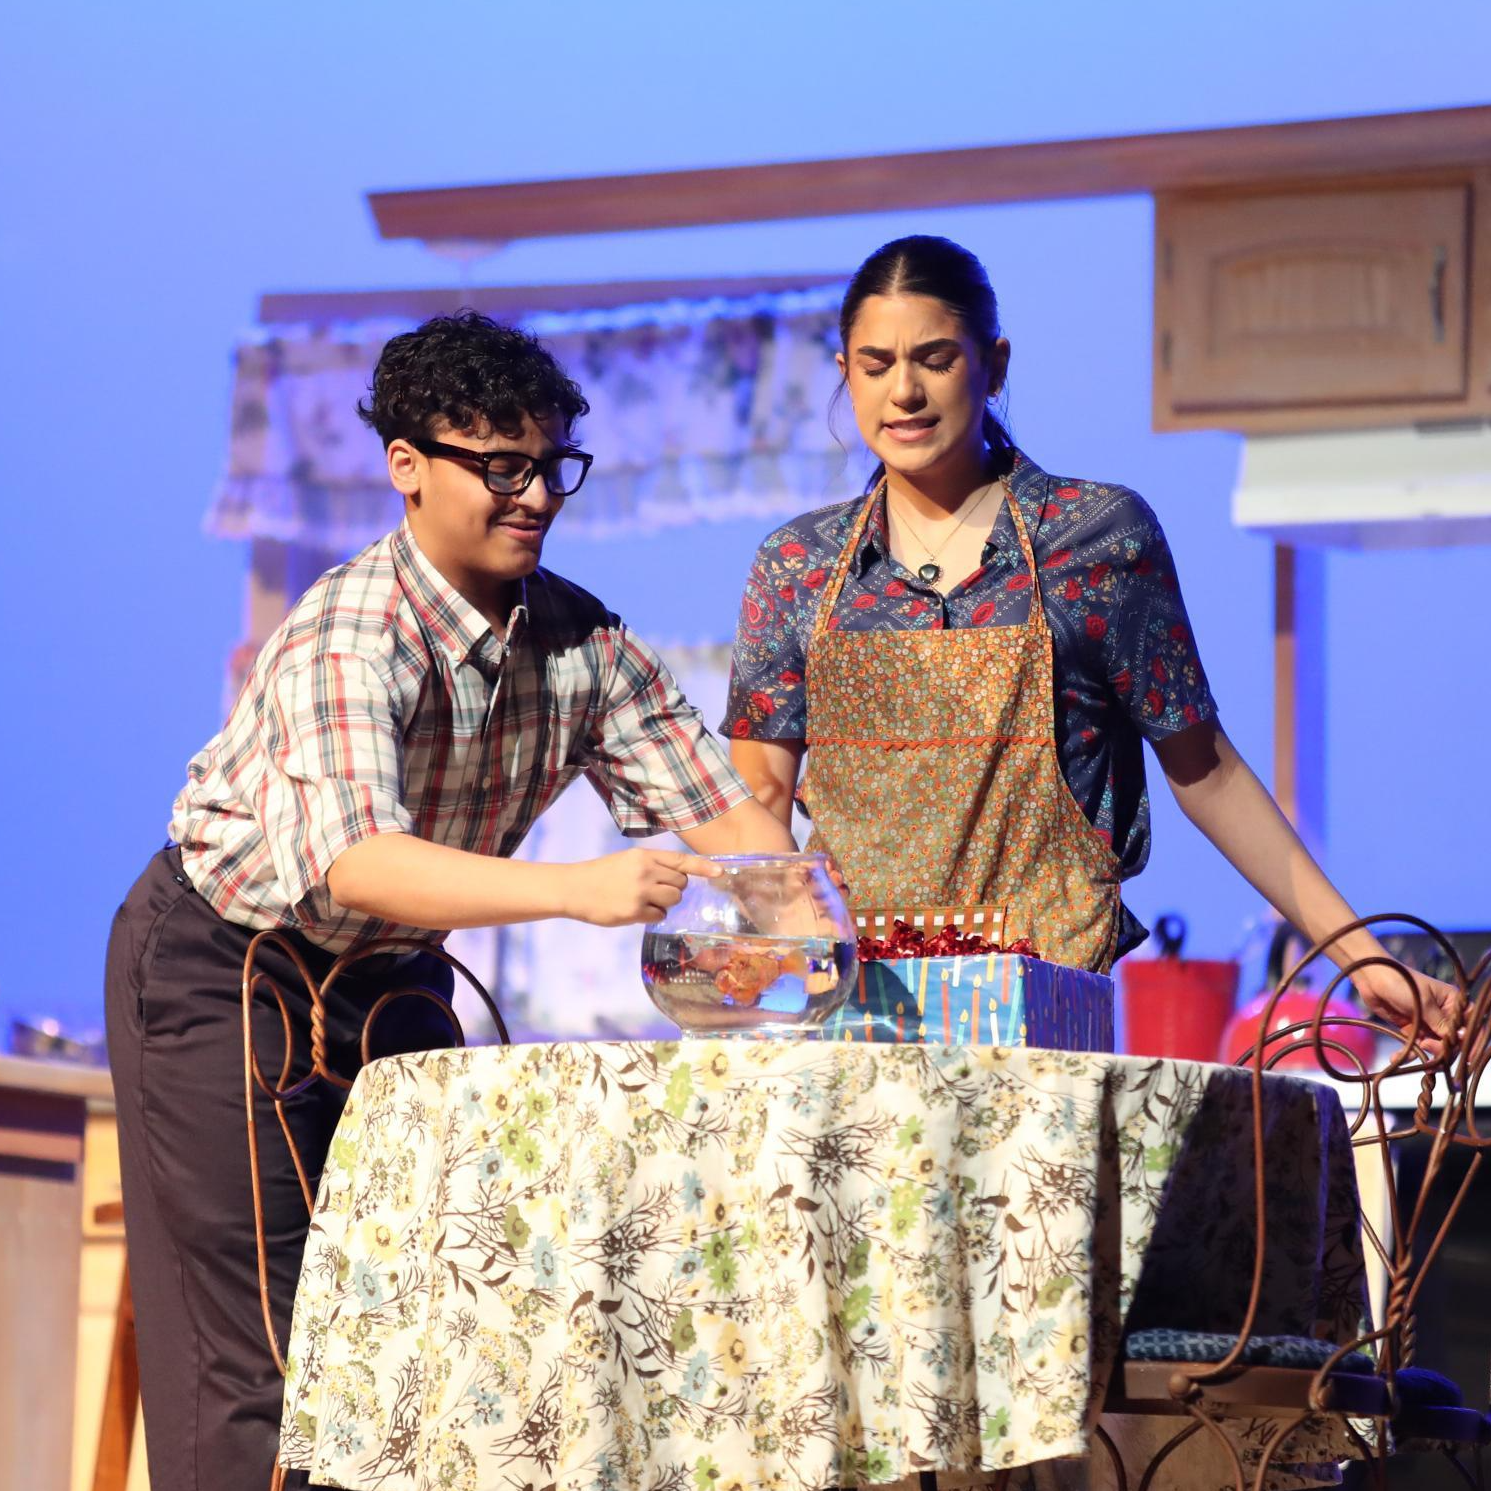 students in contest play